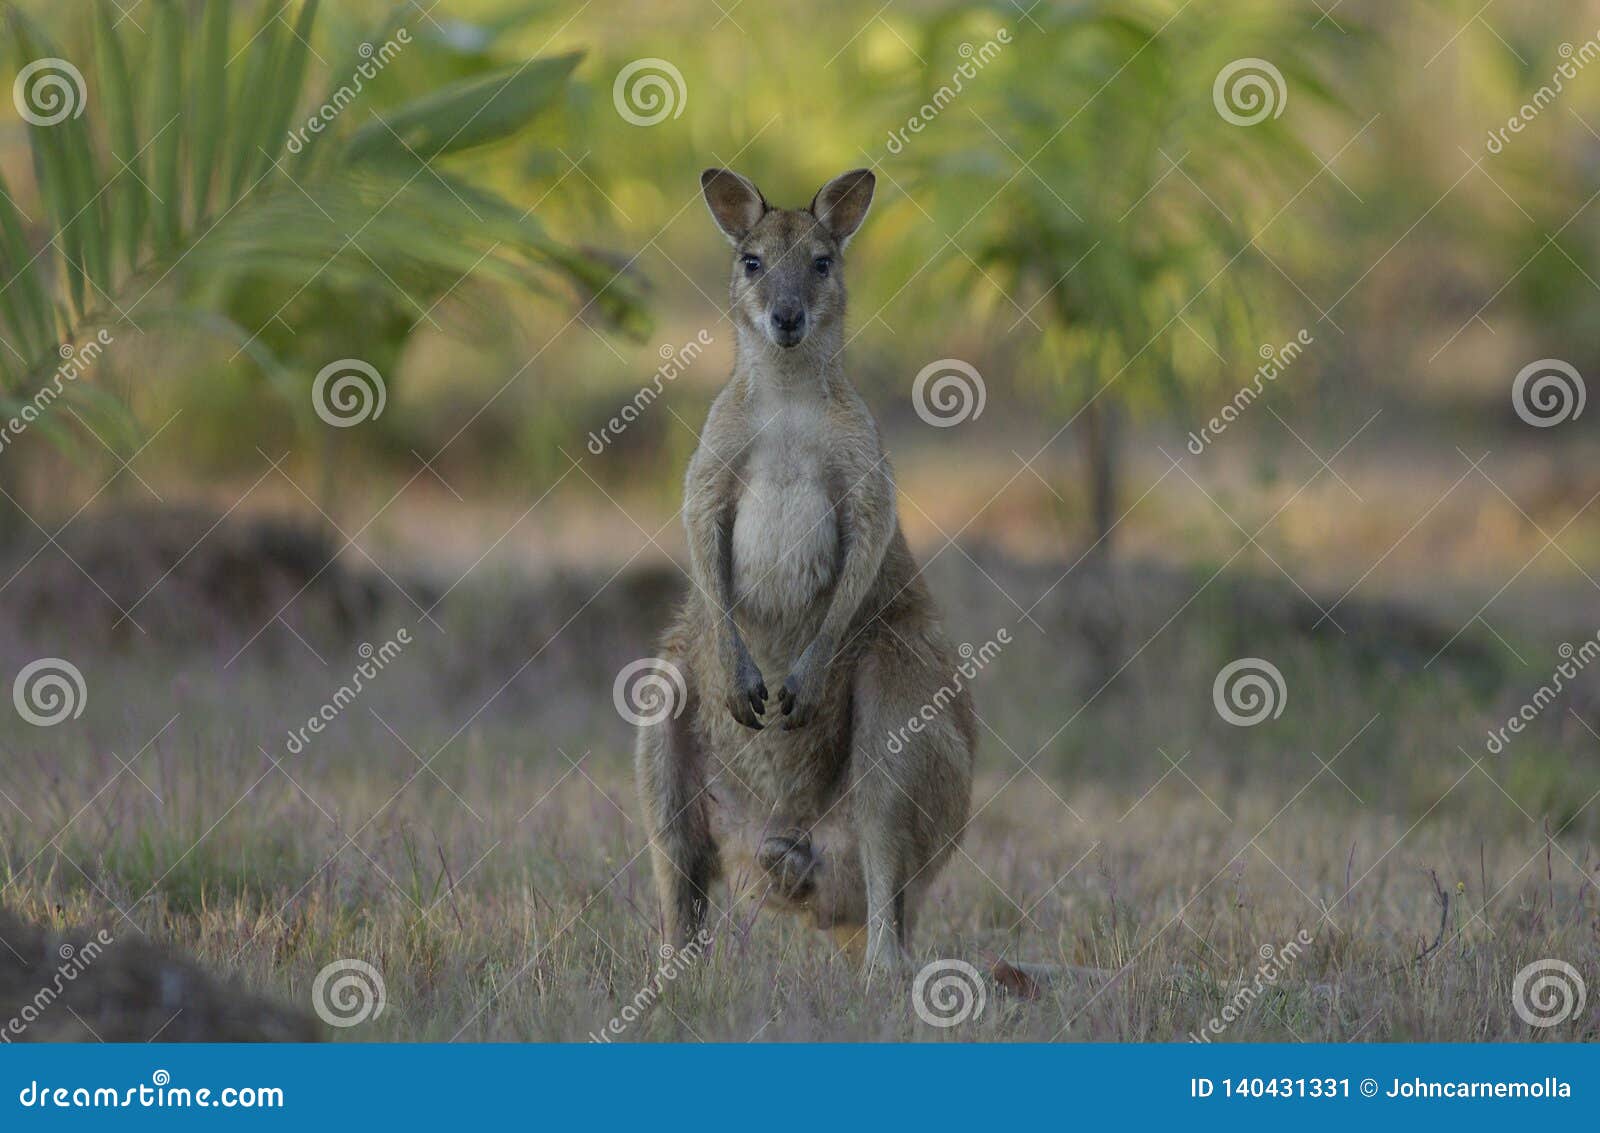 agile wallaby in the northern territory